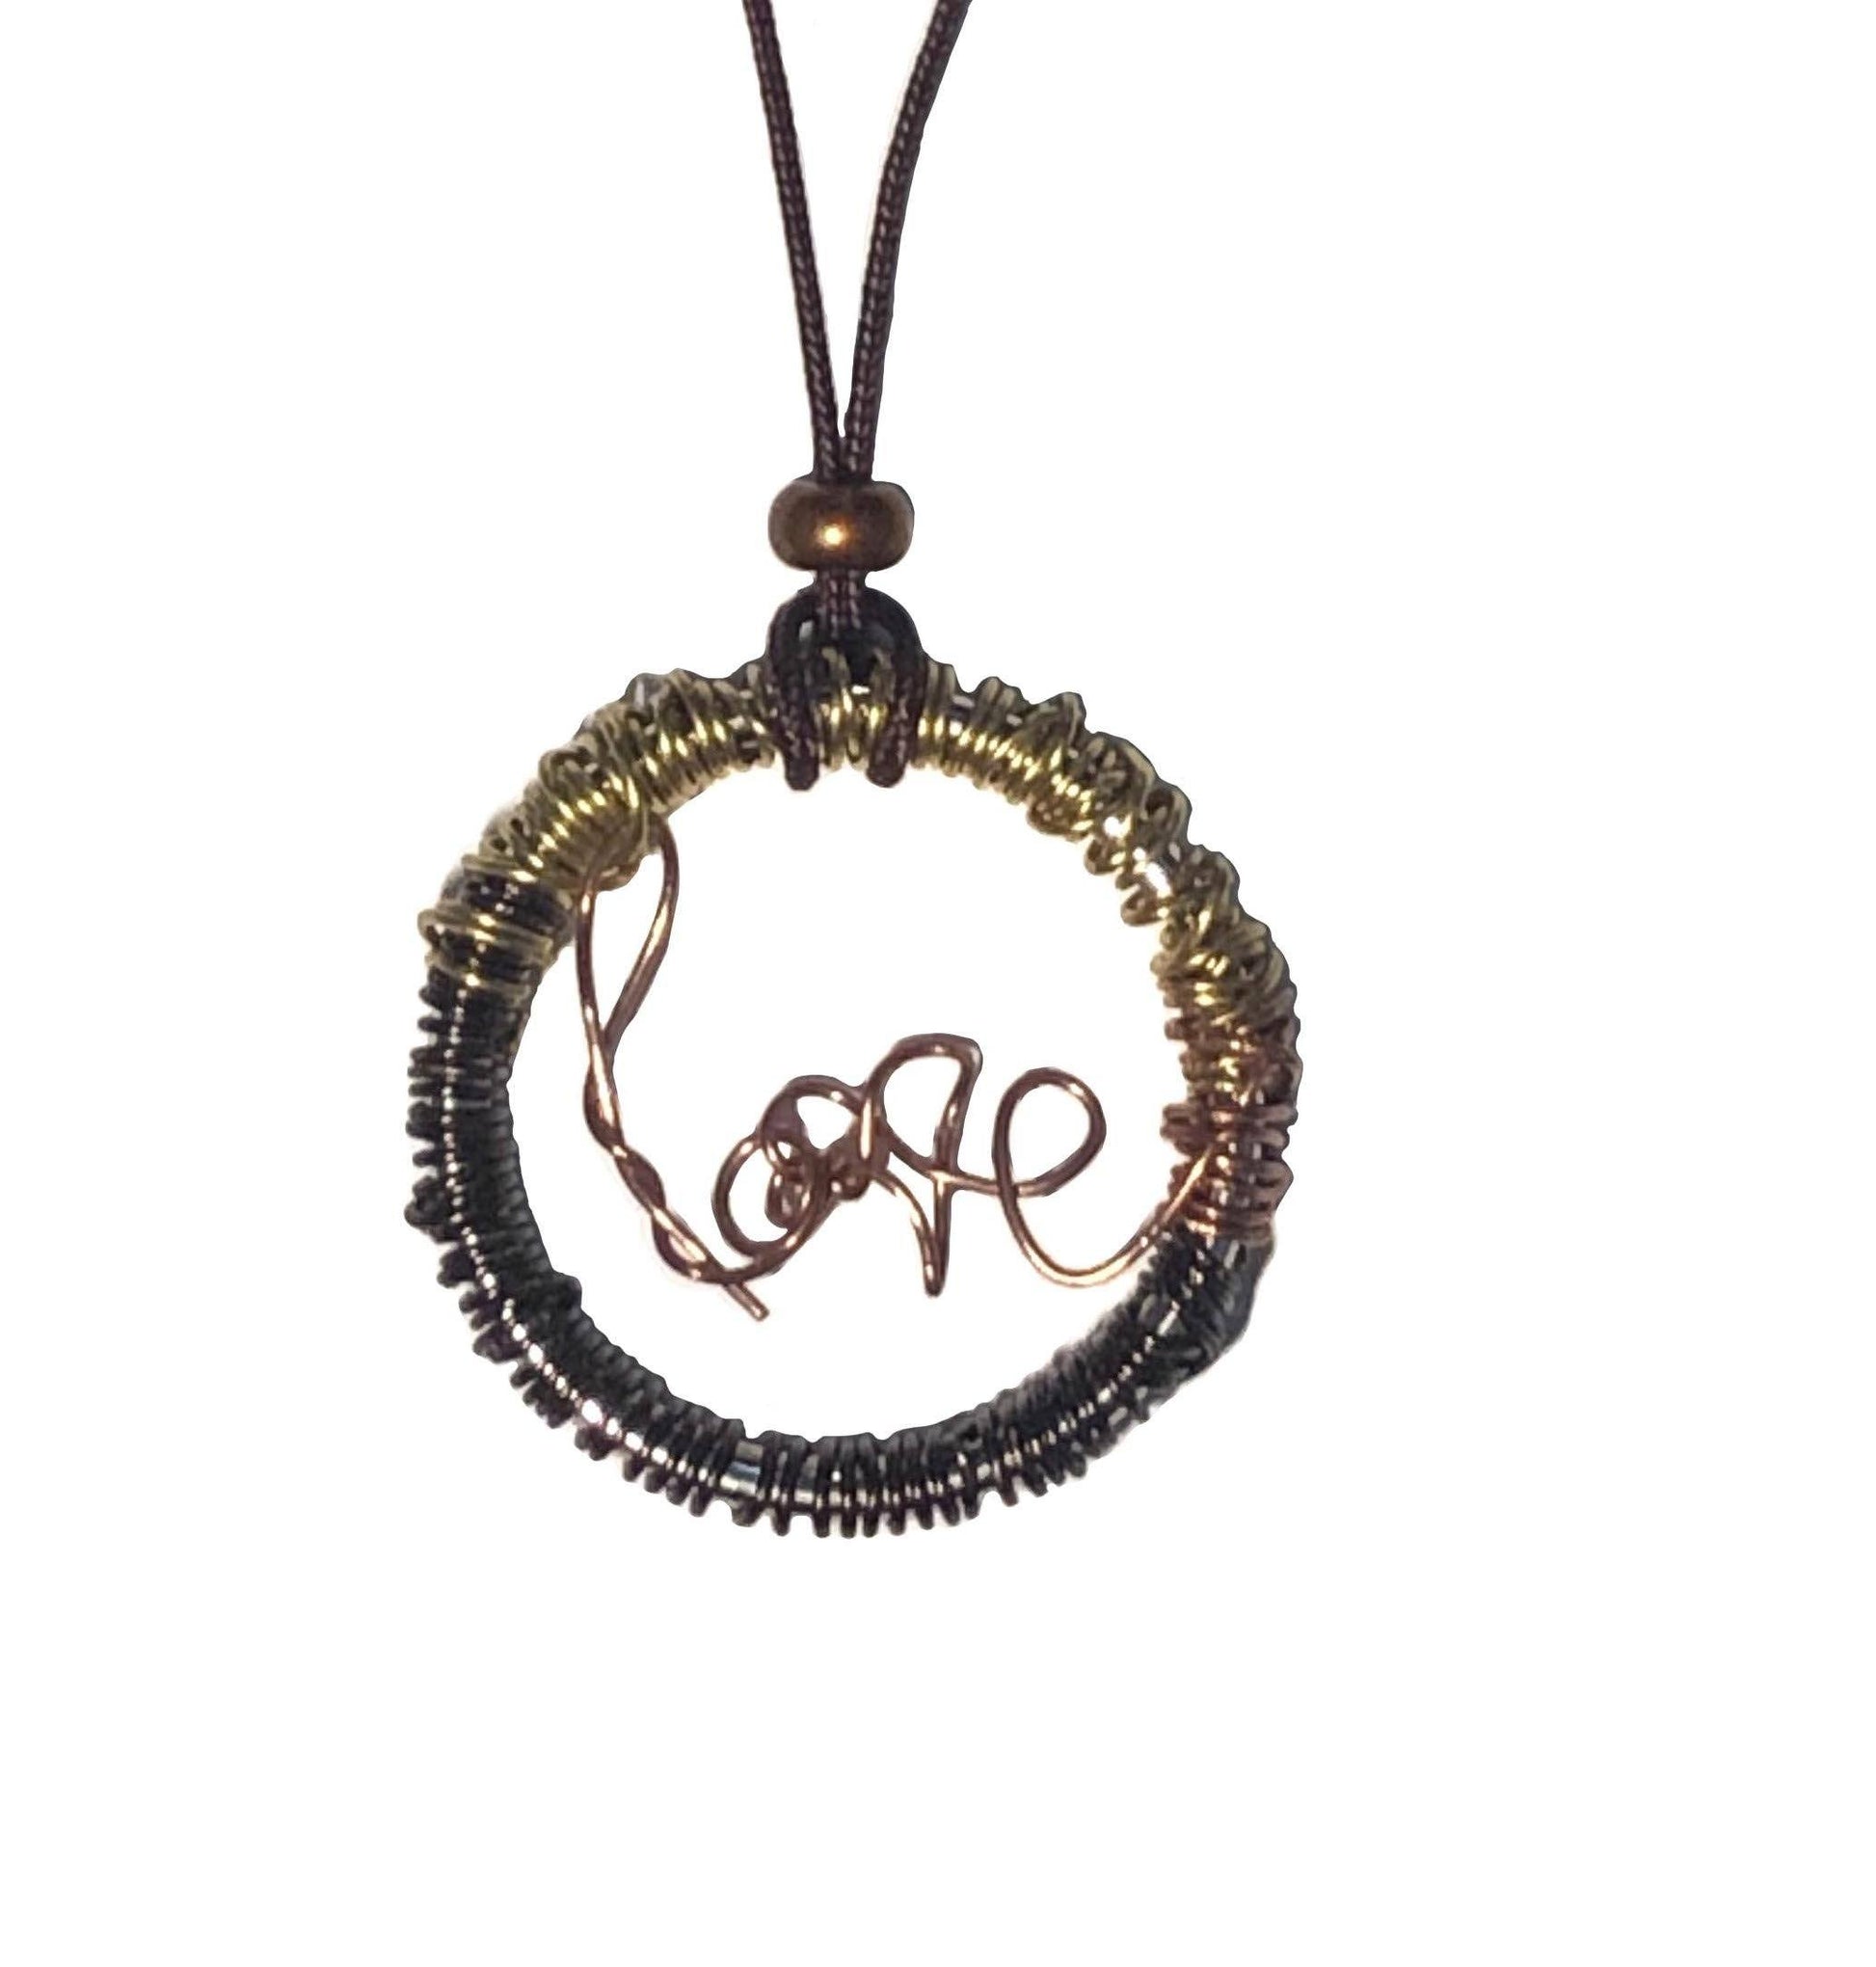 Golden and brown wire wrapped necklace with a copper wire that spells out love at the center, and a bronze bead on top. 